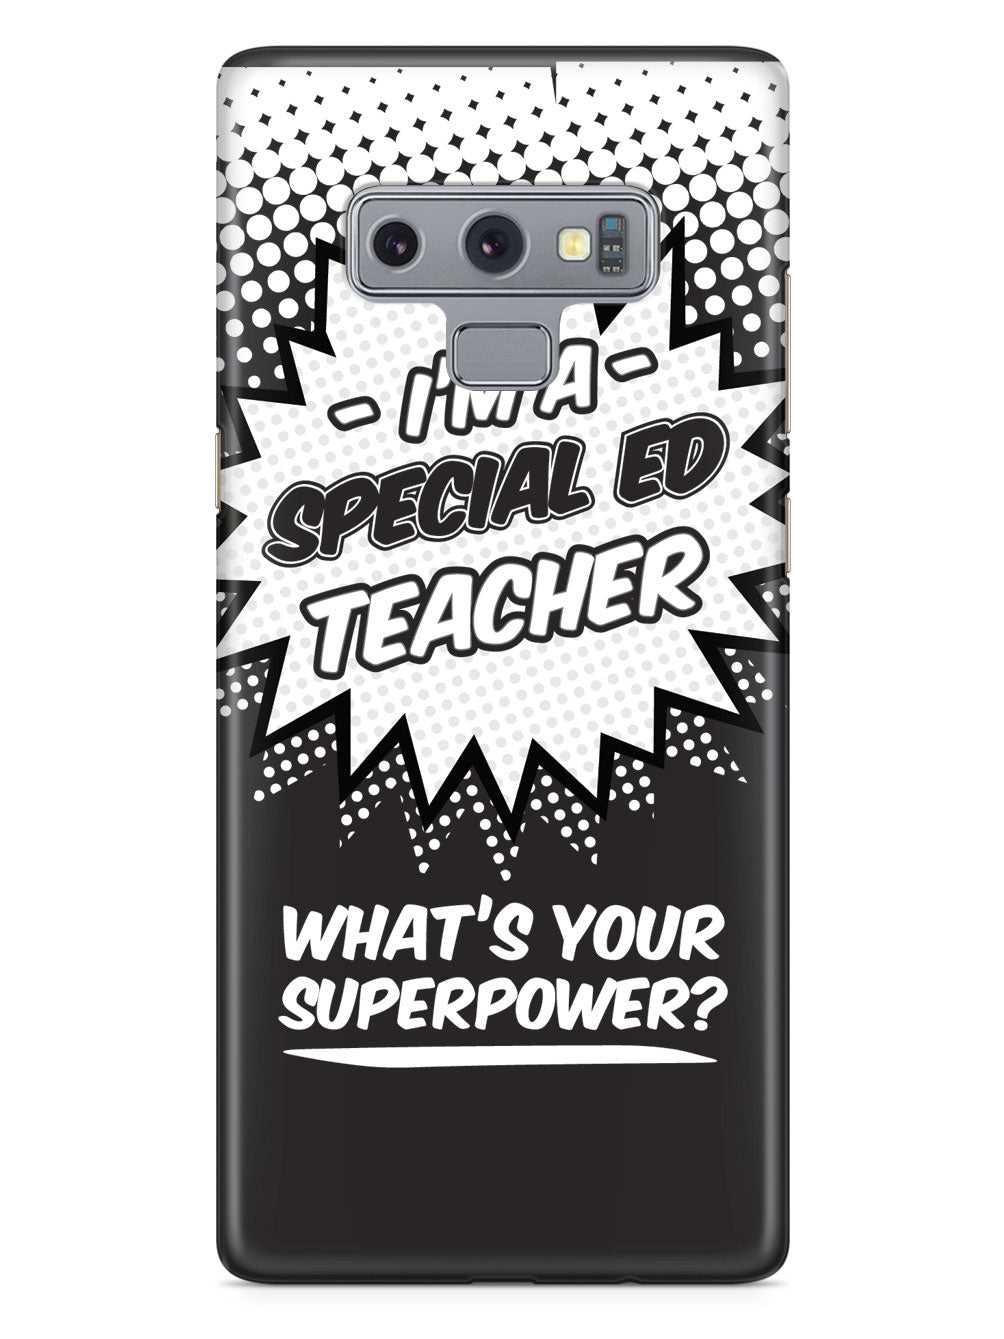 Special Ed Teacher - What's Your Superpower? Case